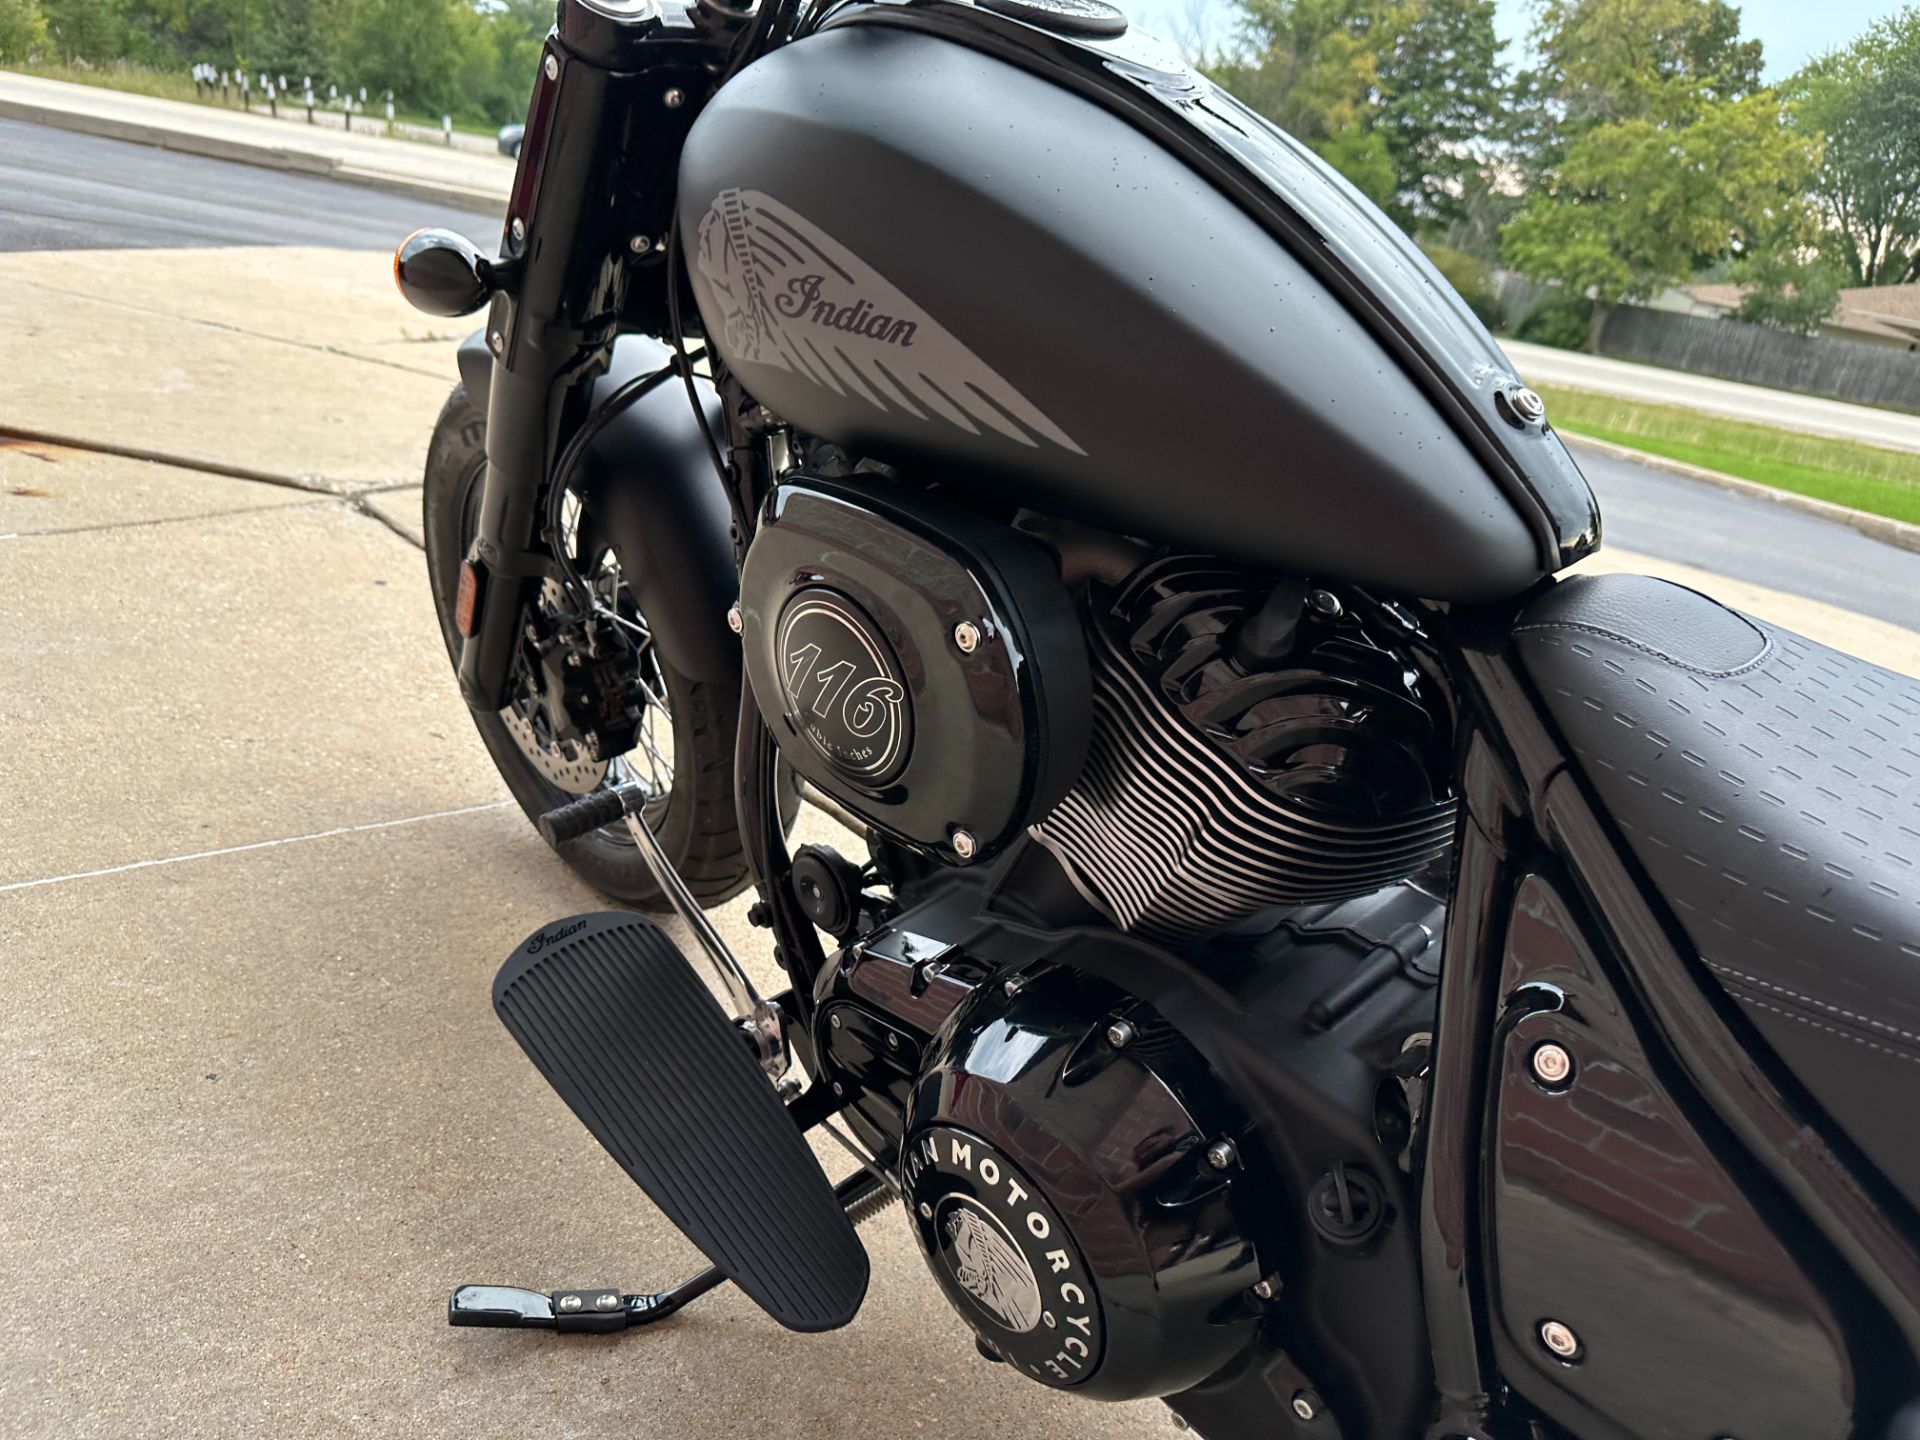 2022 Indian Motorcycle Chief Bobber Dark Horse® in Muskego, Wisconsin - Photo 11